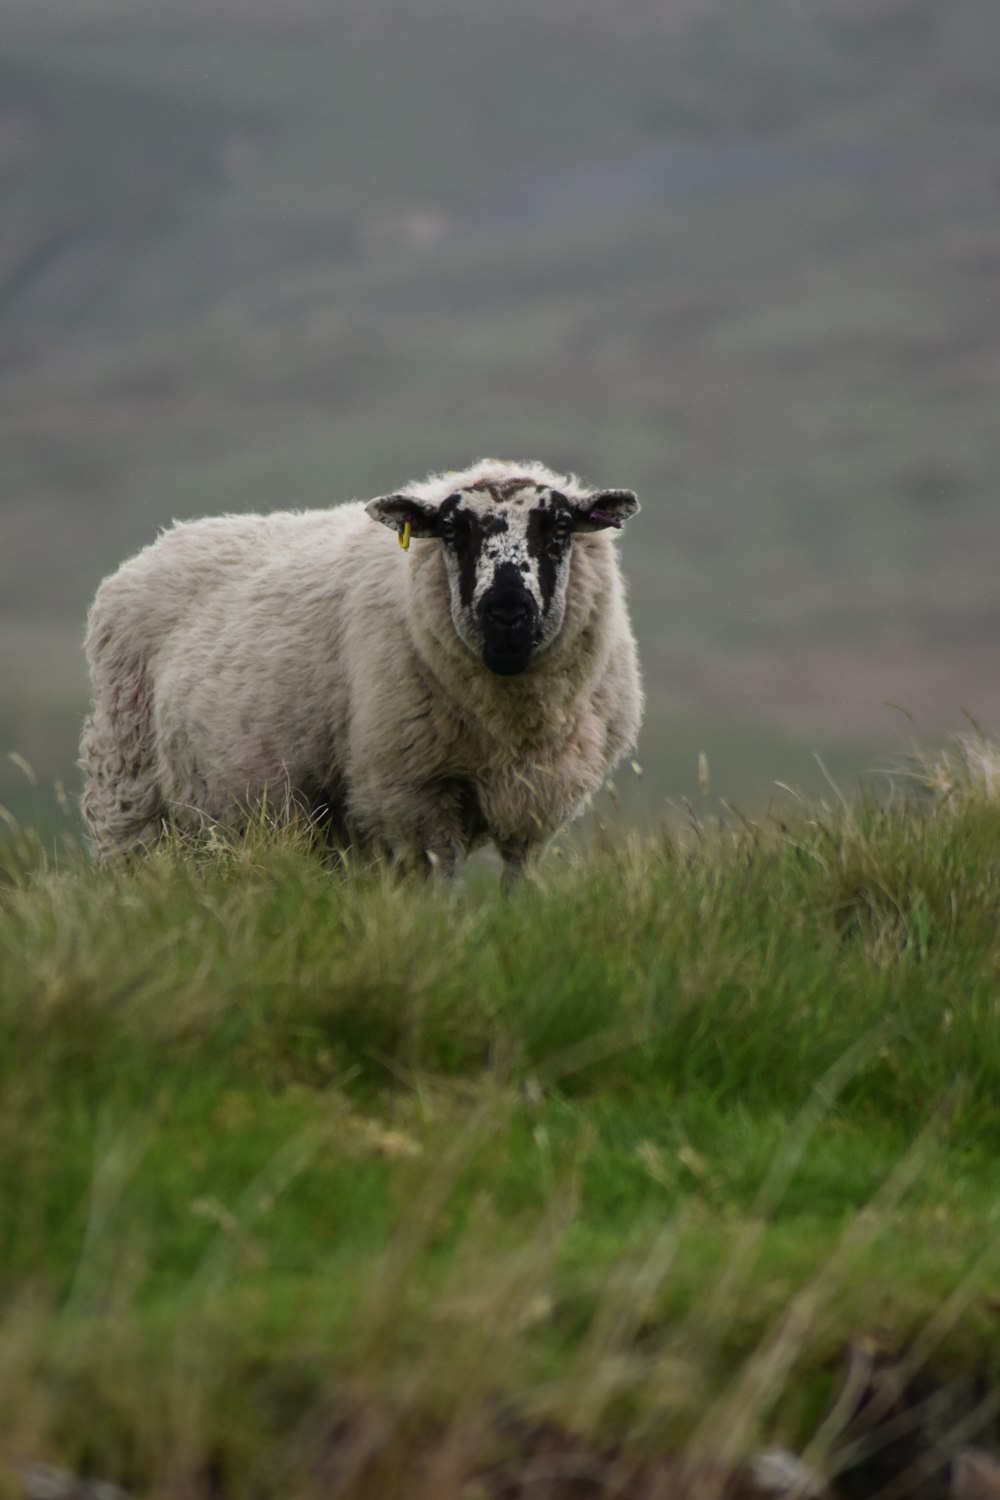 a sheep standing in a grassy field with mountains in the background